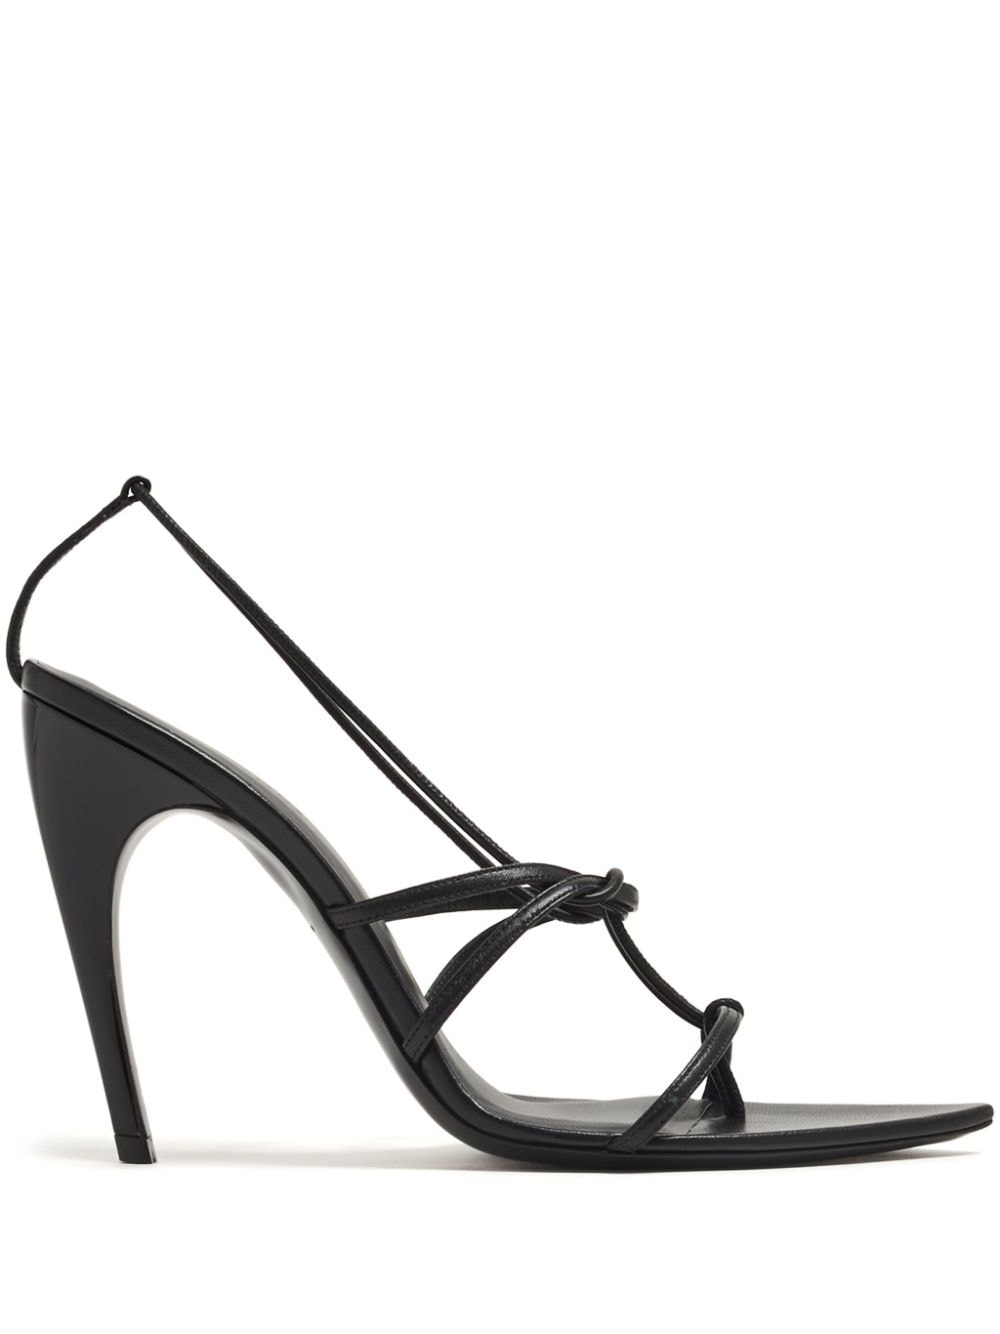 Nensi Dojaka Pointed-toe Leather Sandals In 黑色